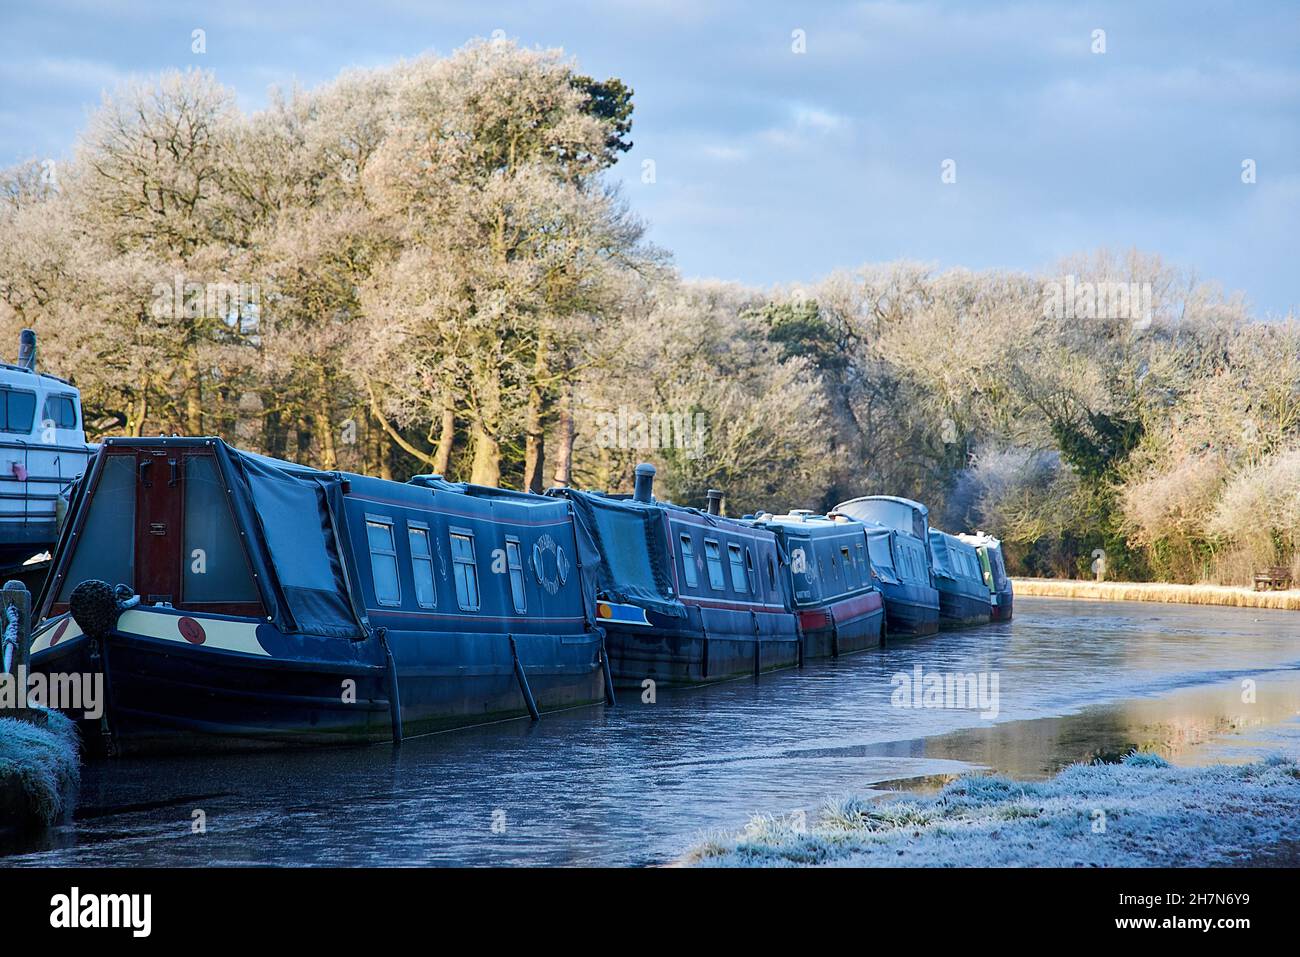 Narrowboats covered in frost on a partially frozen section of the Shropshire Union canal in Nantwich, Cheshire, England. Frosty trees behind Stock Photo